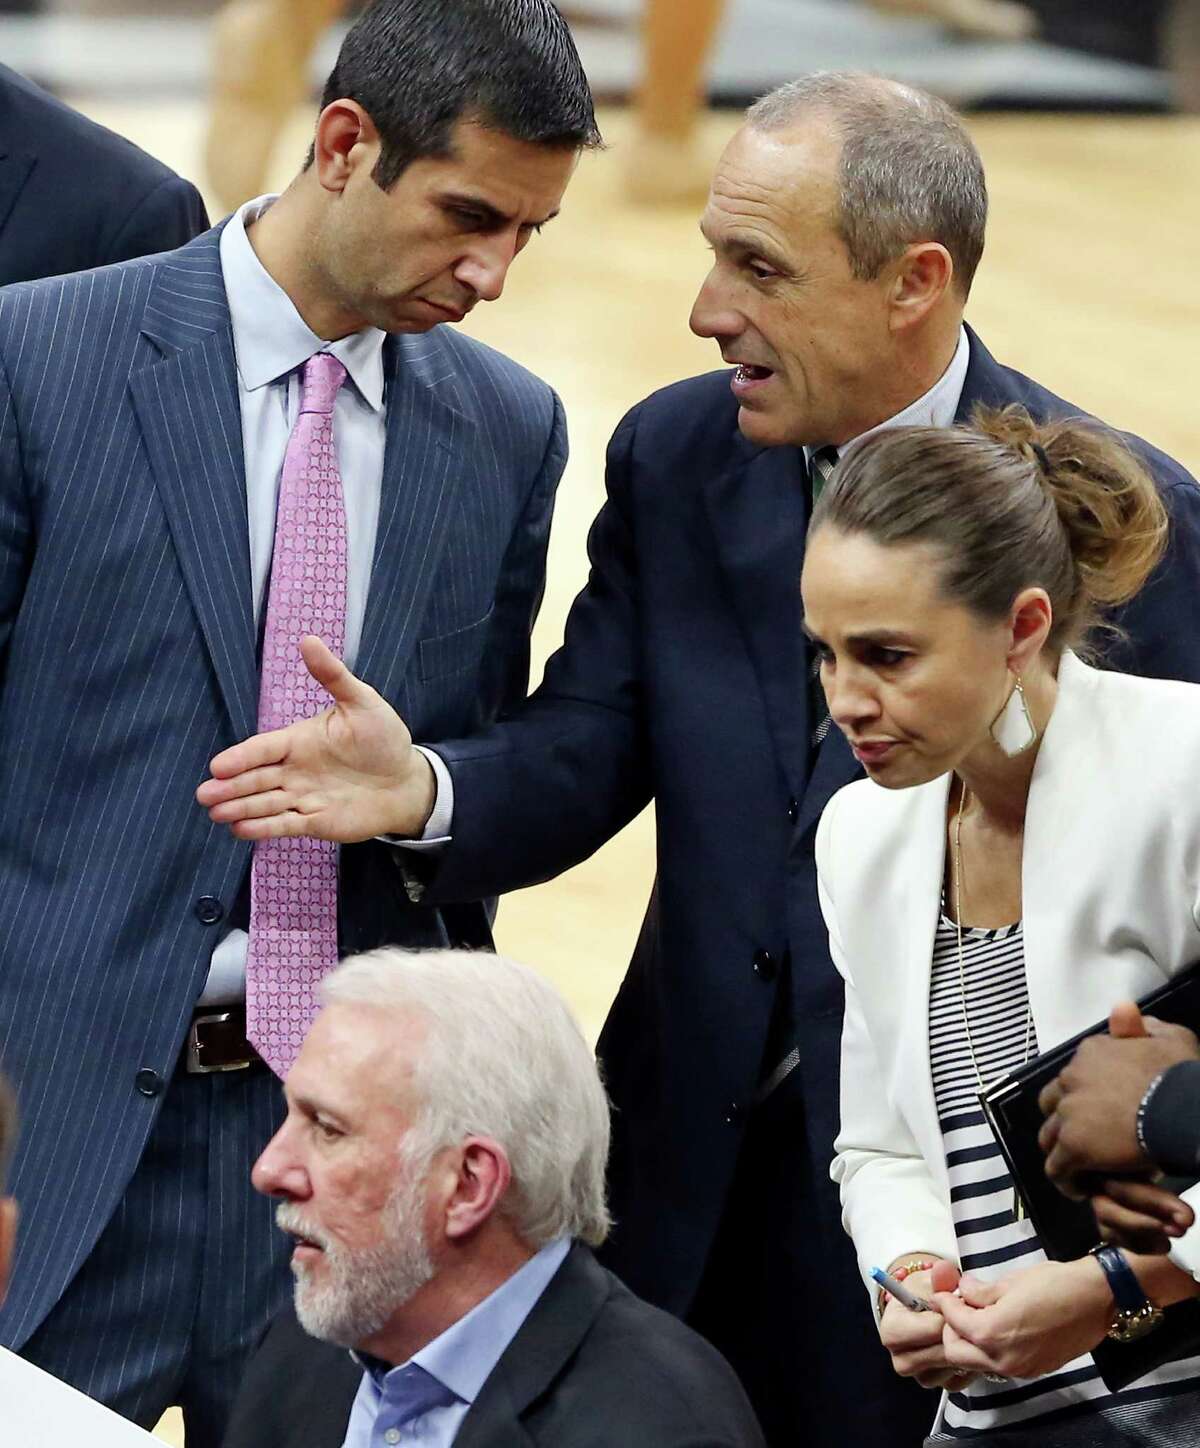 San Antonio Spurs assistant coaches James Borrego (from left clockwise) and Ettore Messina talk as assistant coach Becky Hammon listens to head coach Gregg Popovich talk with players during second half action against the Atlanta Hawks Saturday Nov. 28, 2015 at the AT&T Center. The Spurs won 108-88.